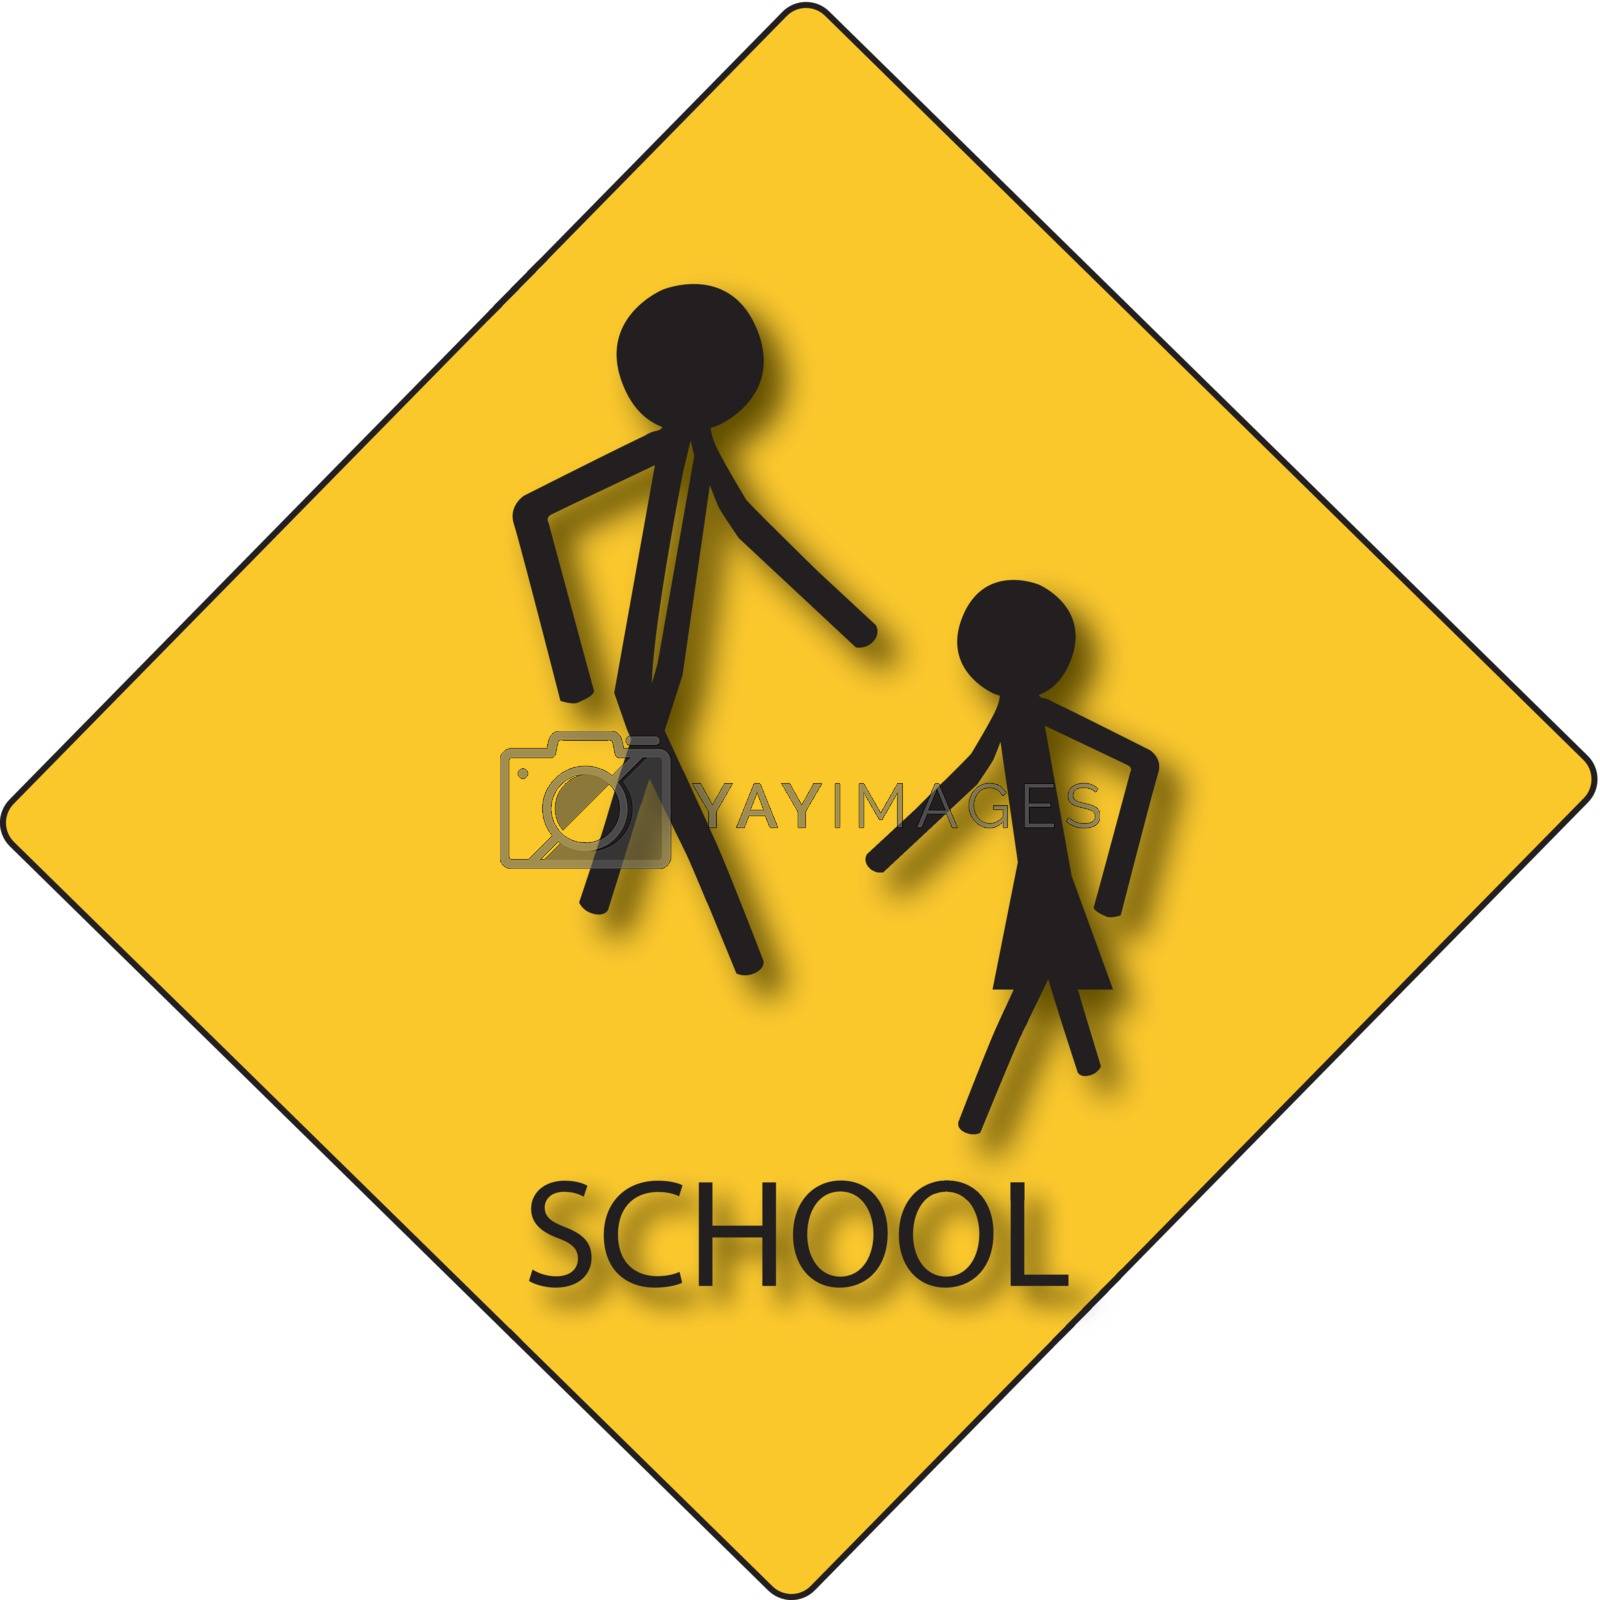 Royalty free image of sign for school children in black and yellow by compuinfoto